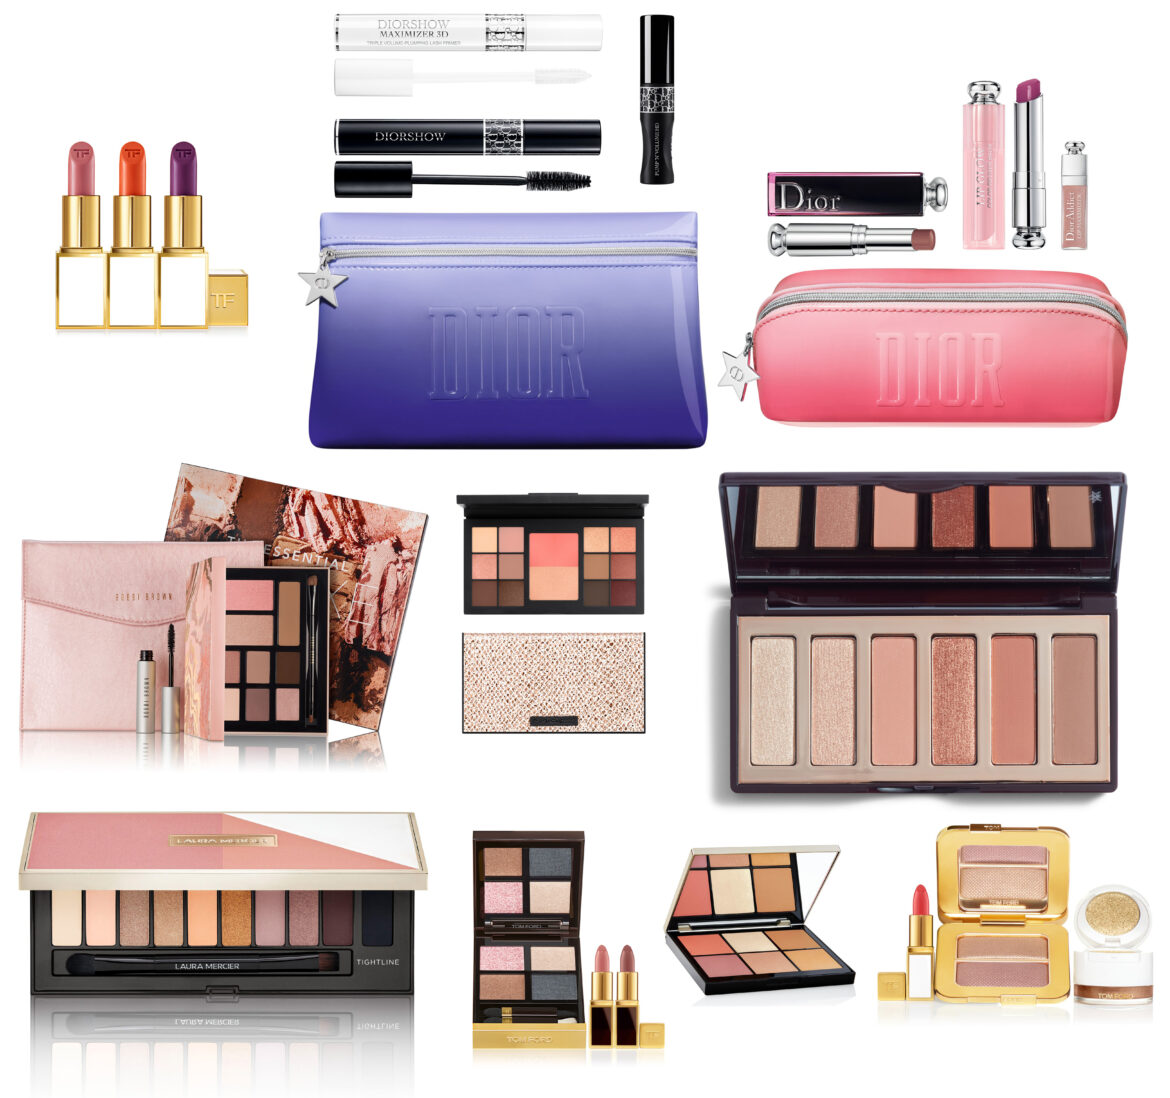 Shiseido Archives - Beauty Trends and Latest Makeup Collections | Chic ...